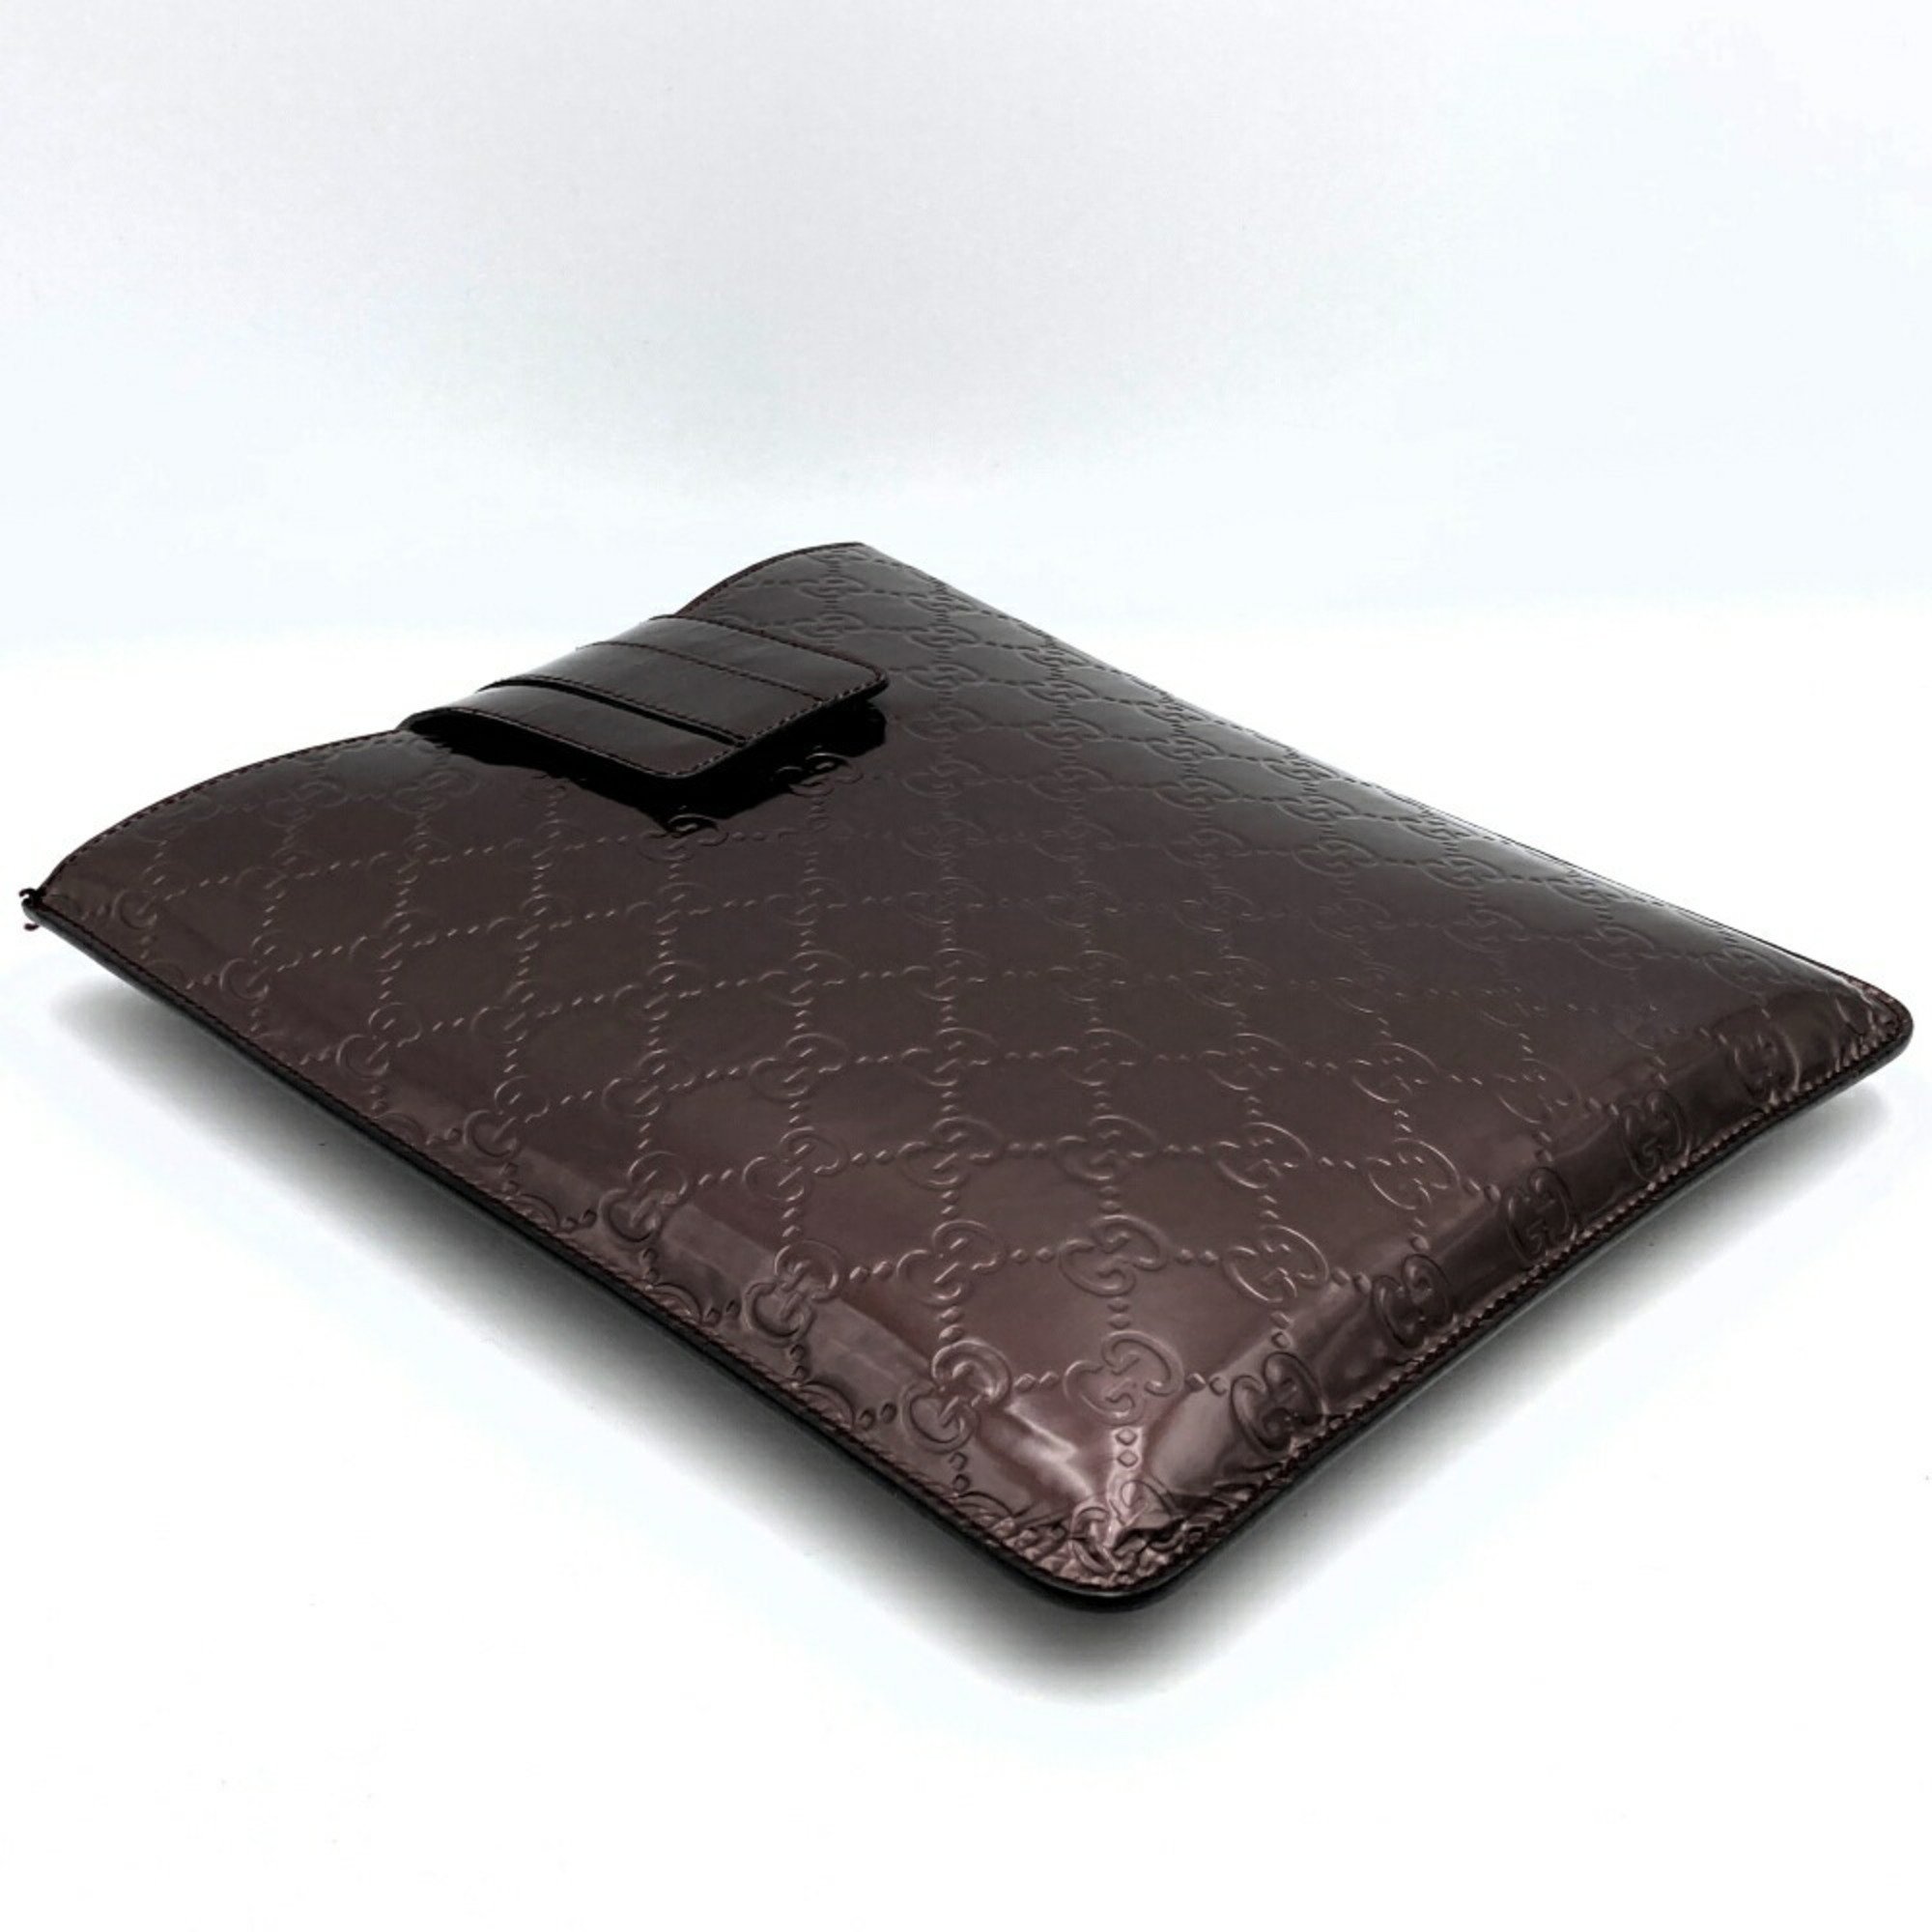 GUCCI 256575 iPad case, tablet GG embossed, brown patent leather, for women and men